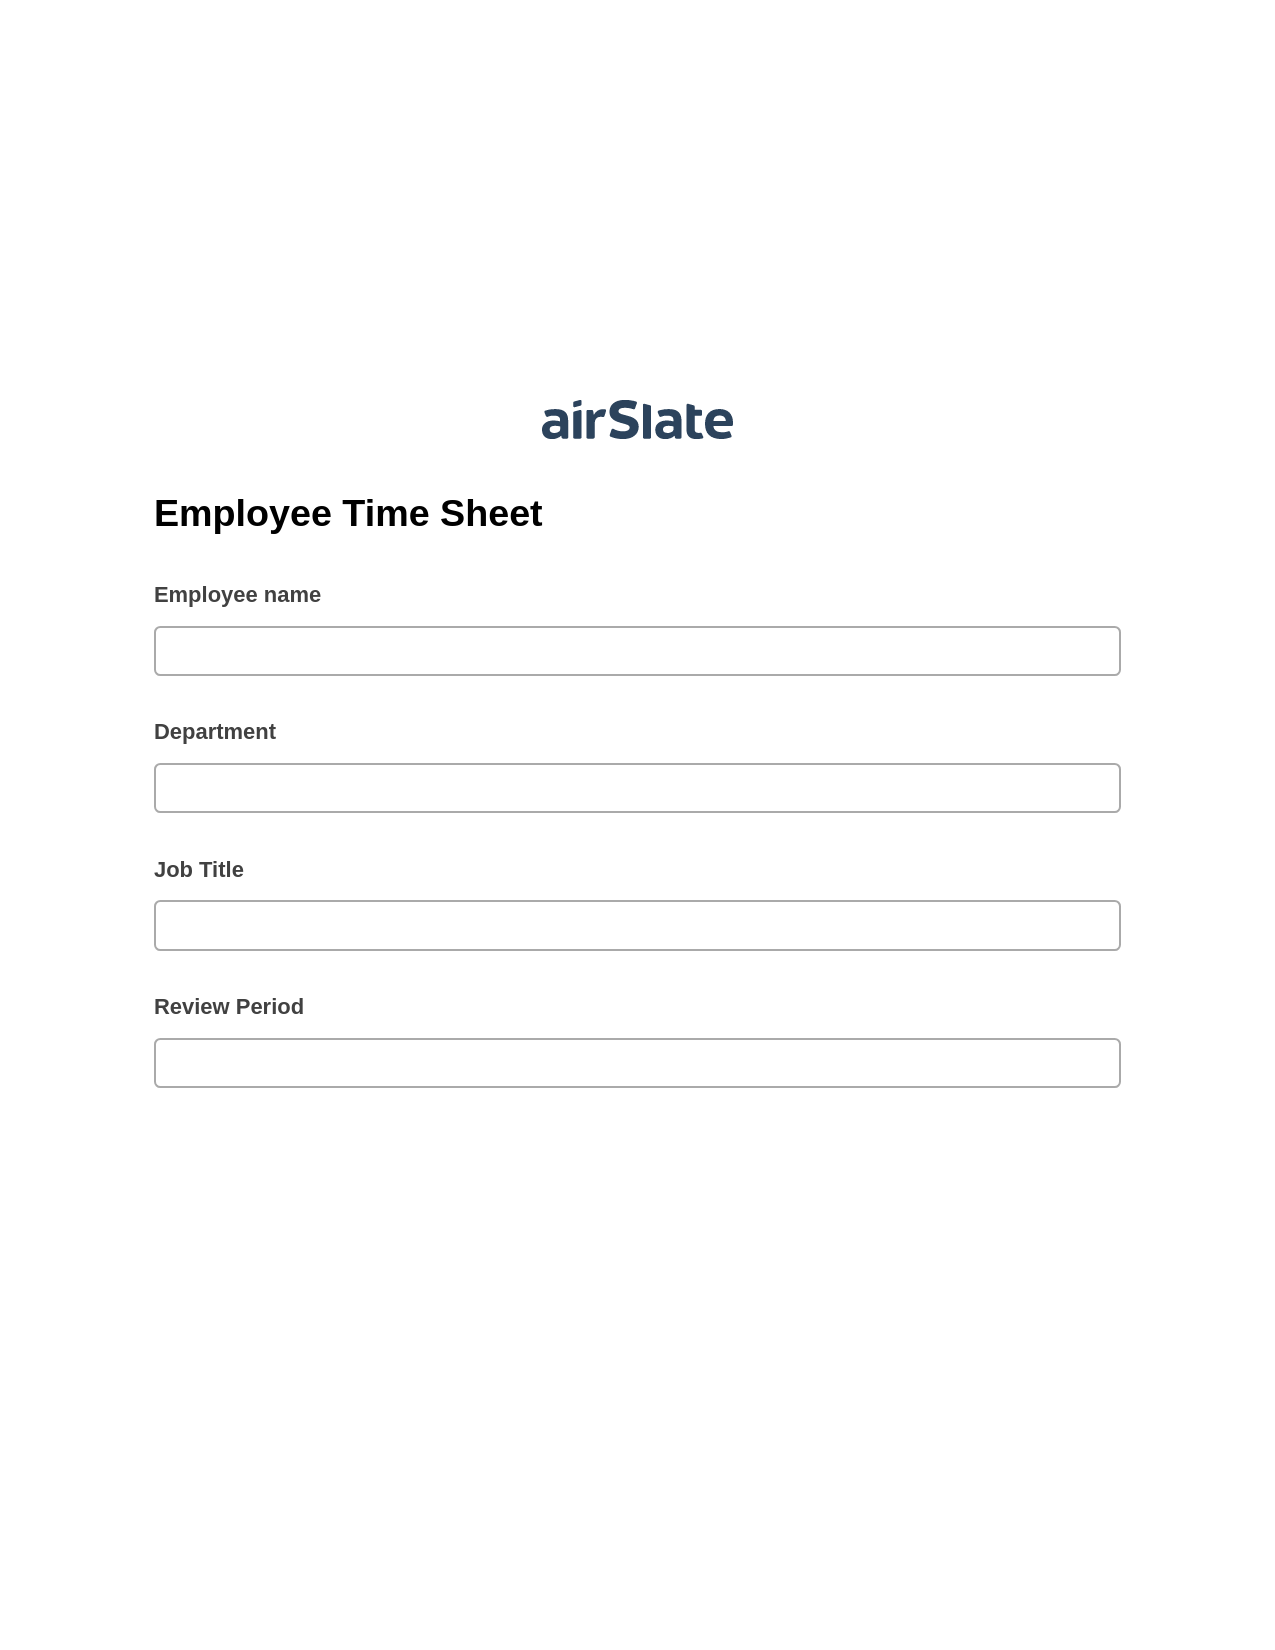 Multirole Employee Time Sheet System Bot - Slack Two-Way Binding Bot, Send a Slate with Roles Bot, Archive to Dropbox Bot